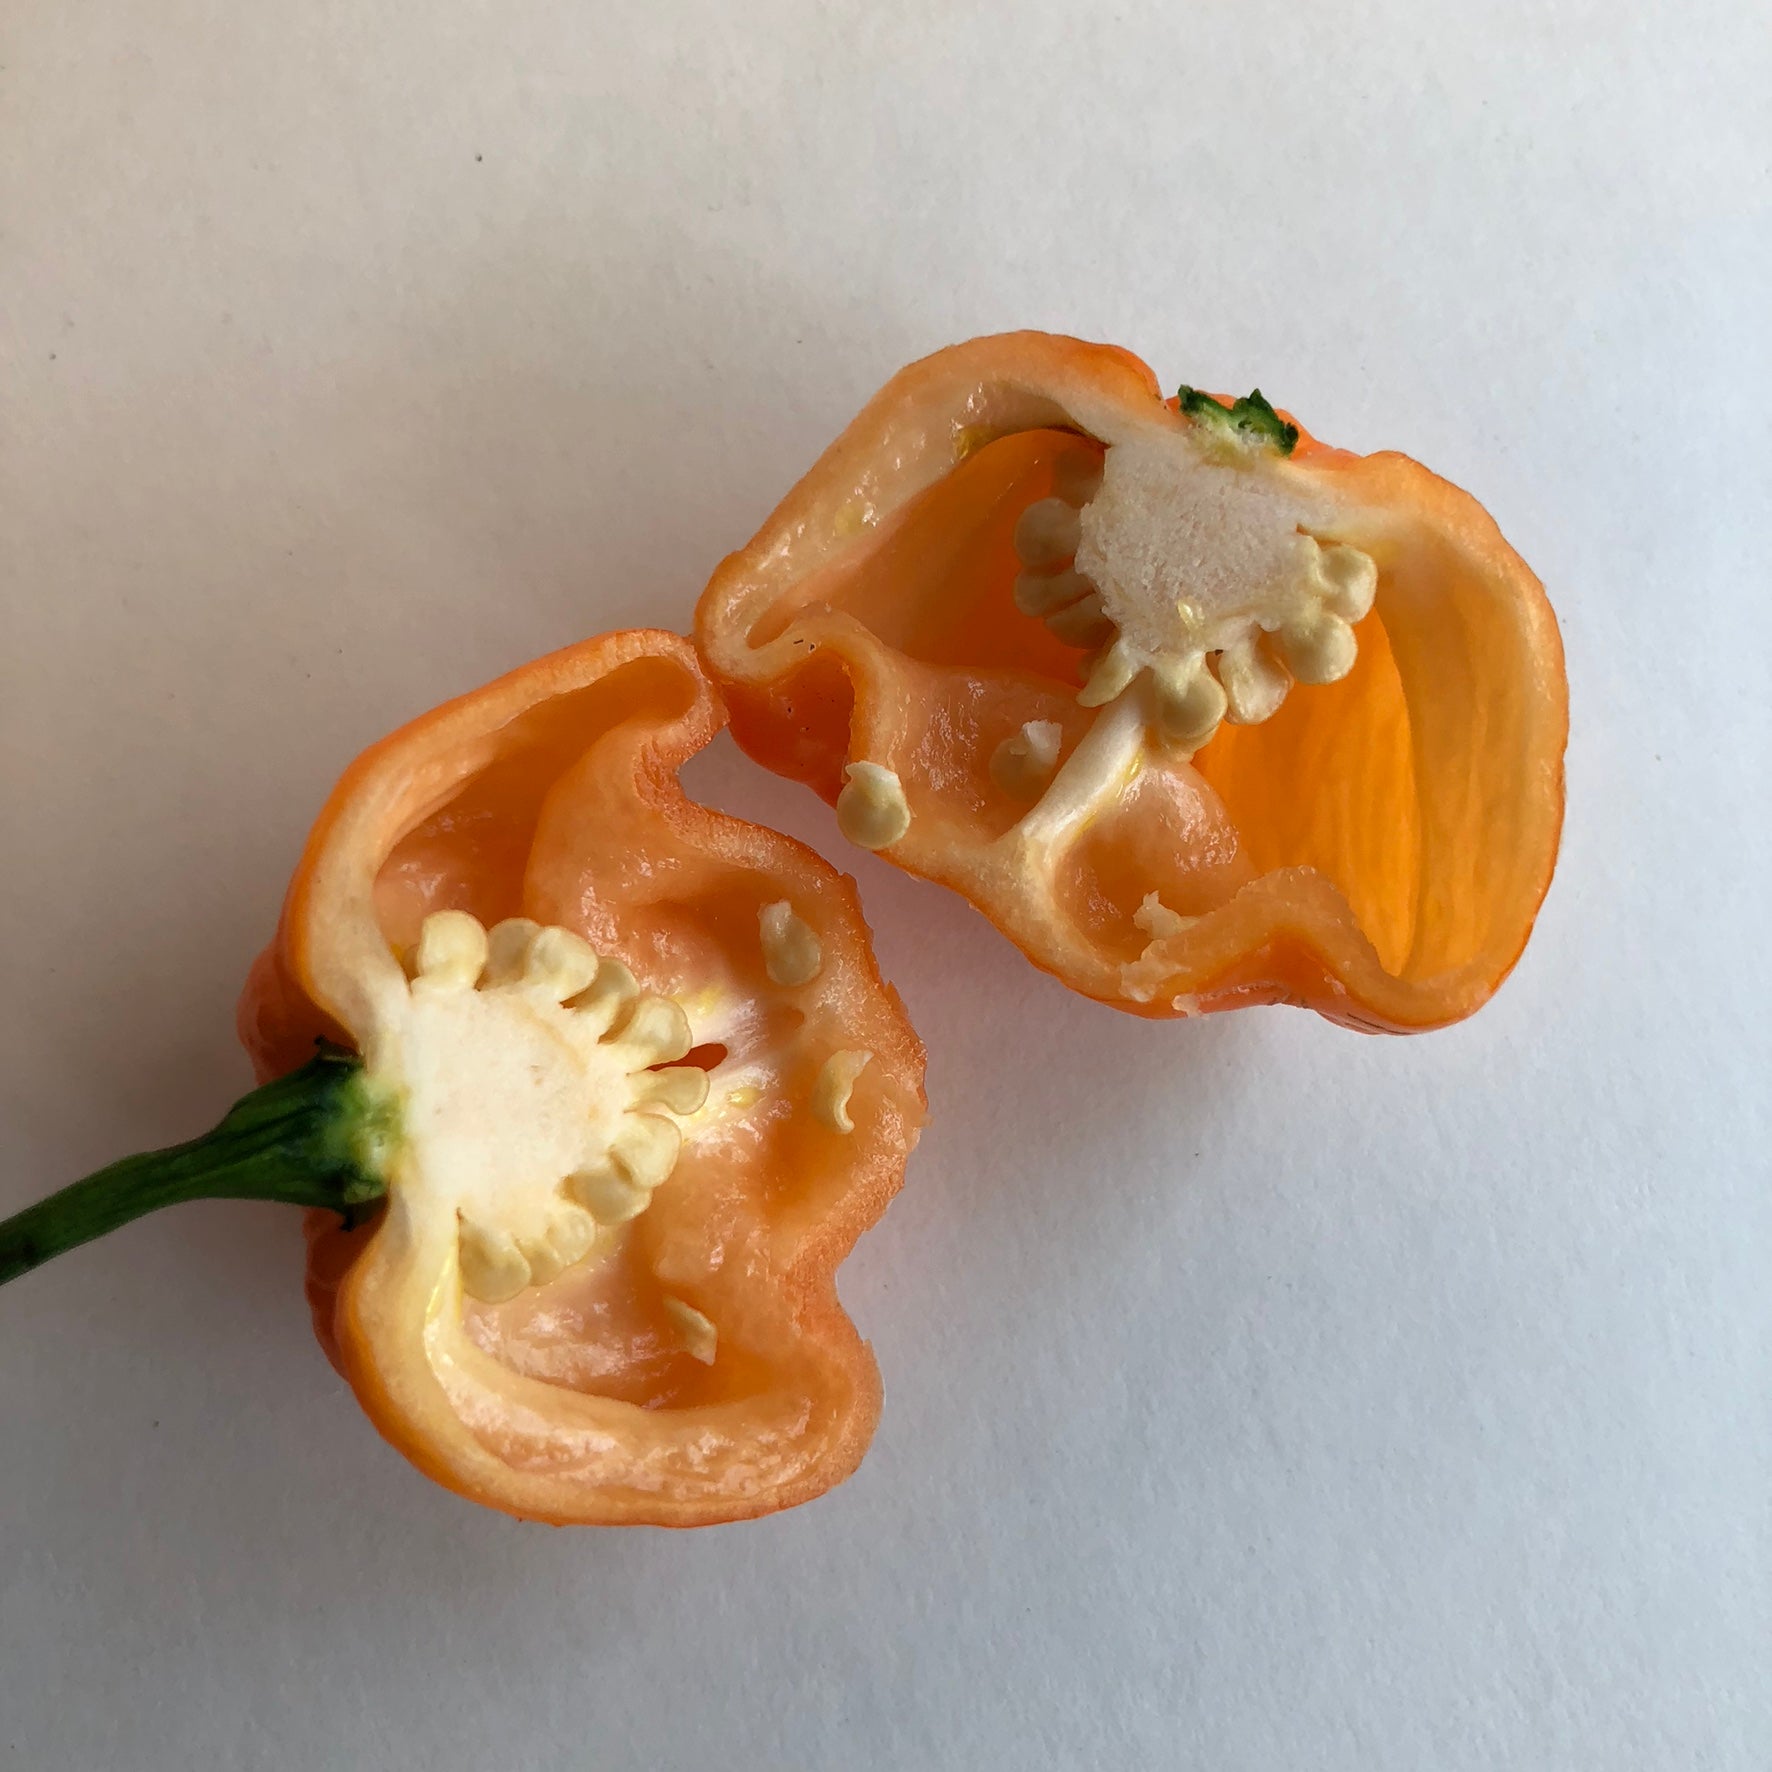 Orange Freeport Scotch Bonnet Chile Peppers Information and Facts